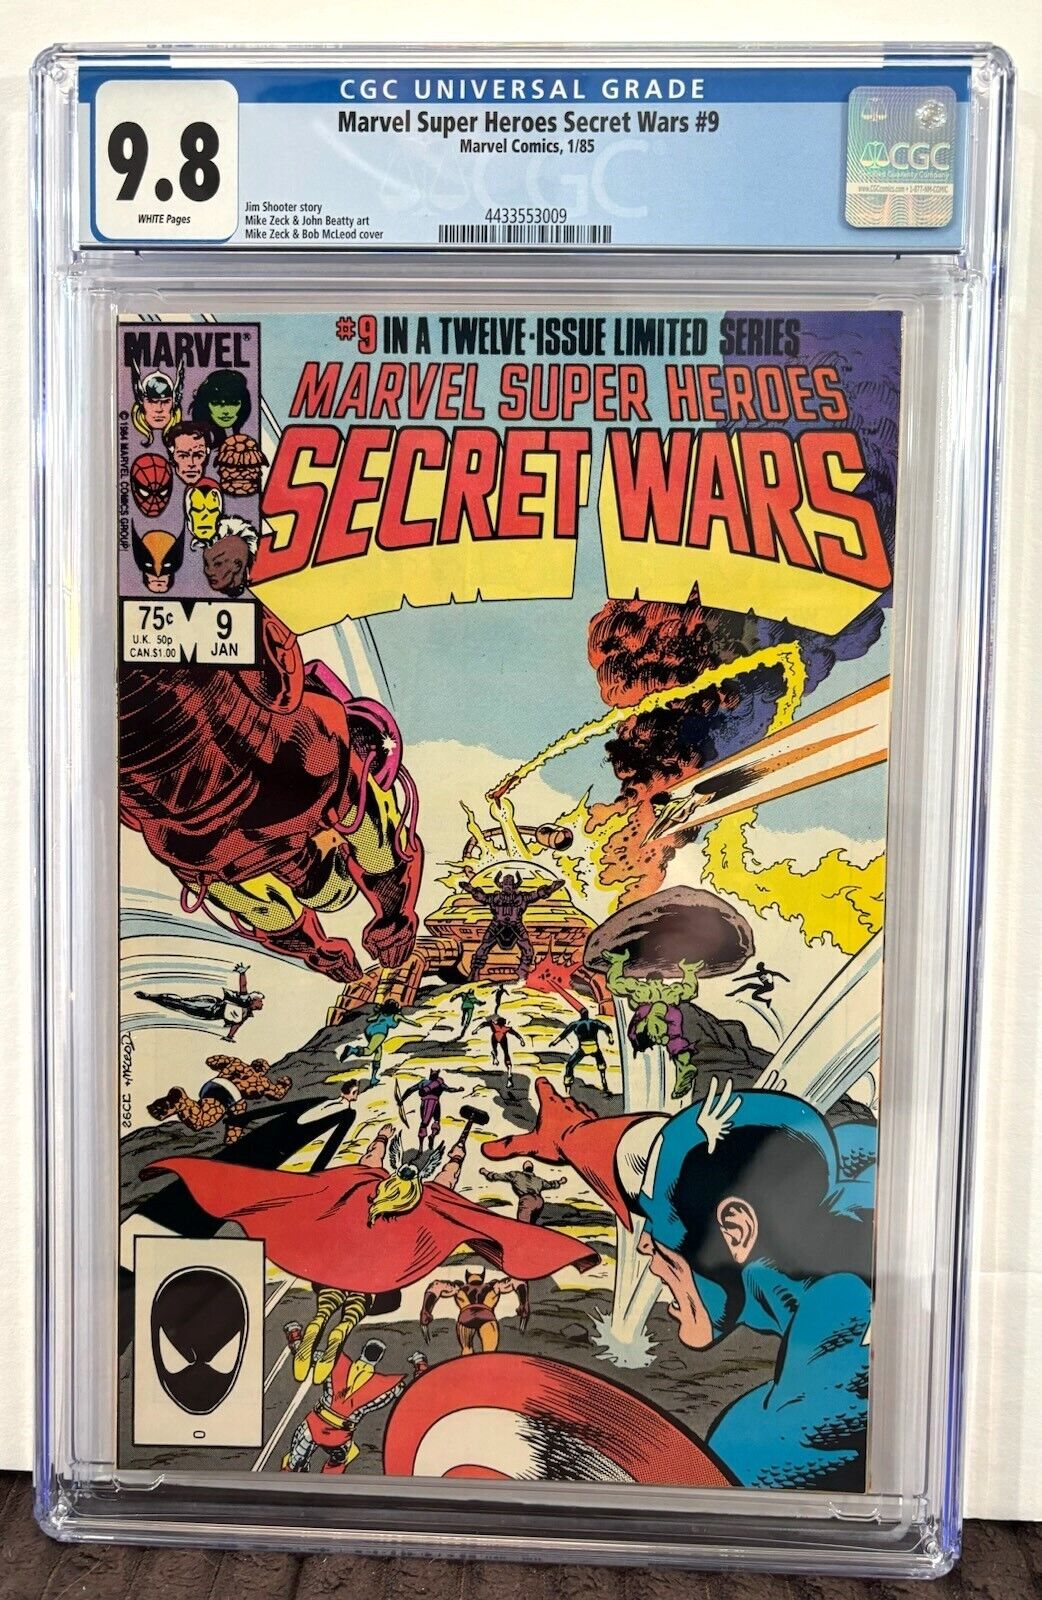 Secret Wars Limited Series #9, CGC 9.8, White Pages, 1st Printing, Jan. \'85